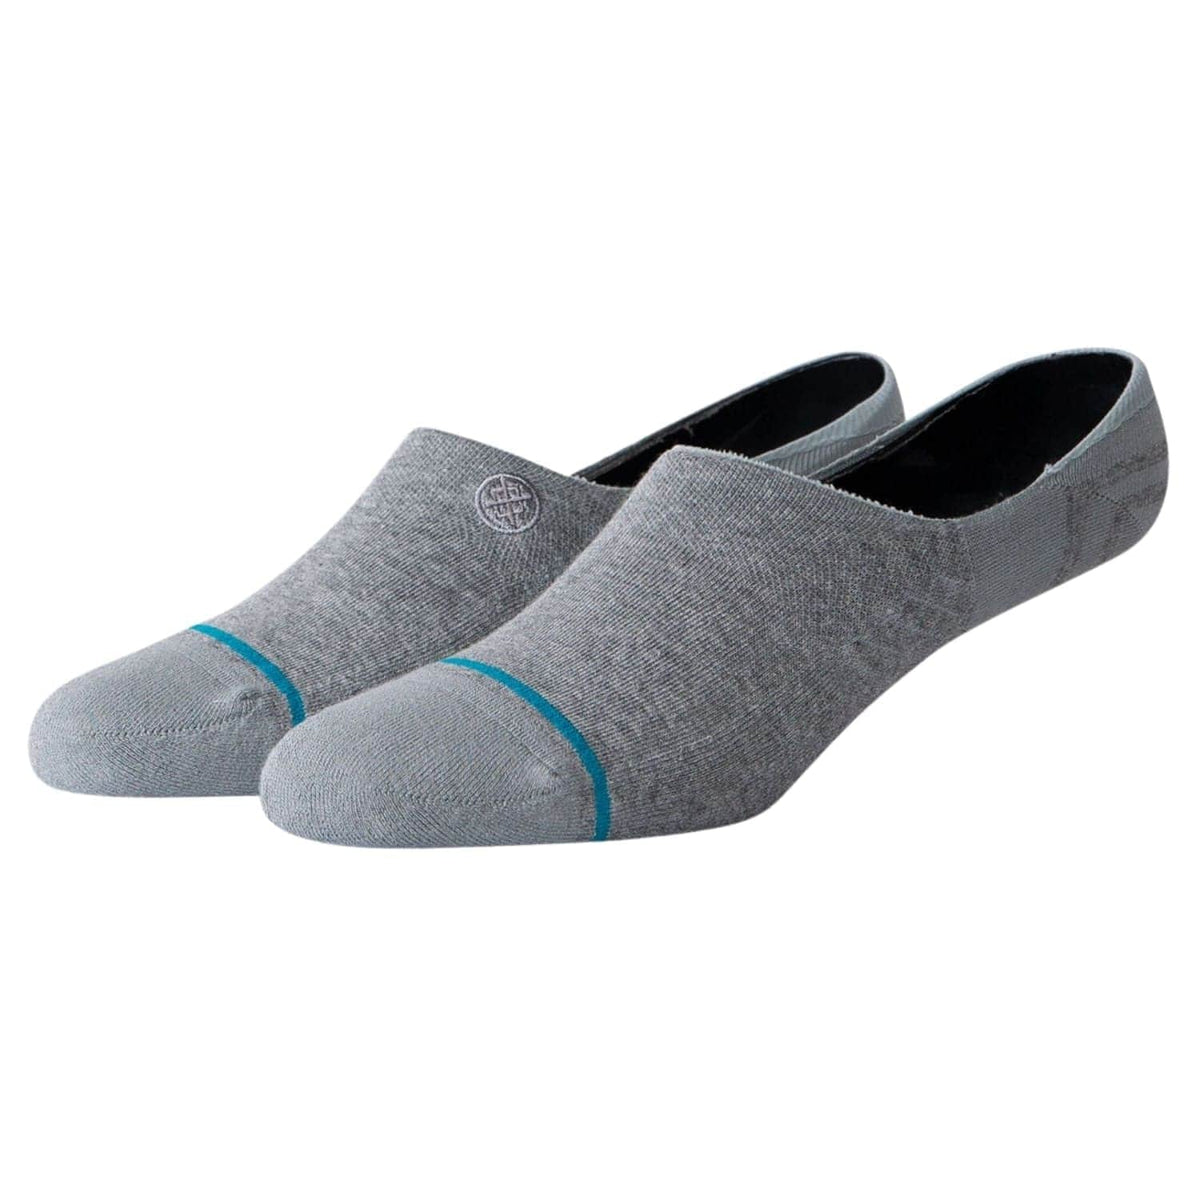 Stance Gamut 2 Invisible Socks - Grey Heather - Mens Invisible/No Show Socks by Stance